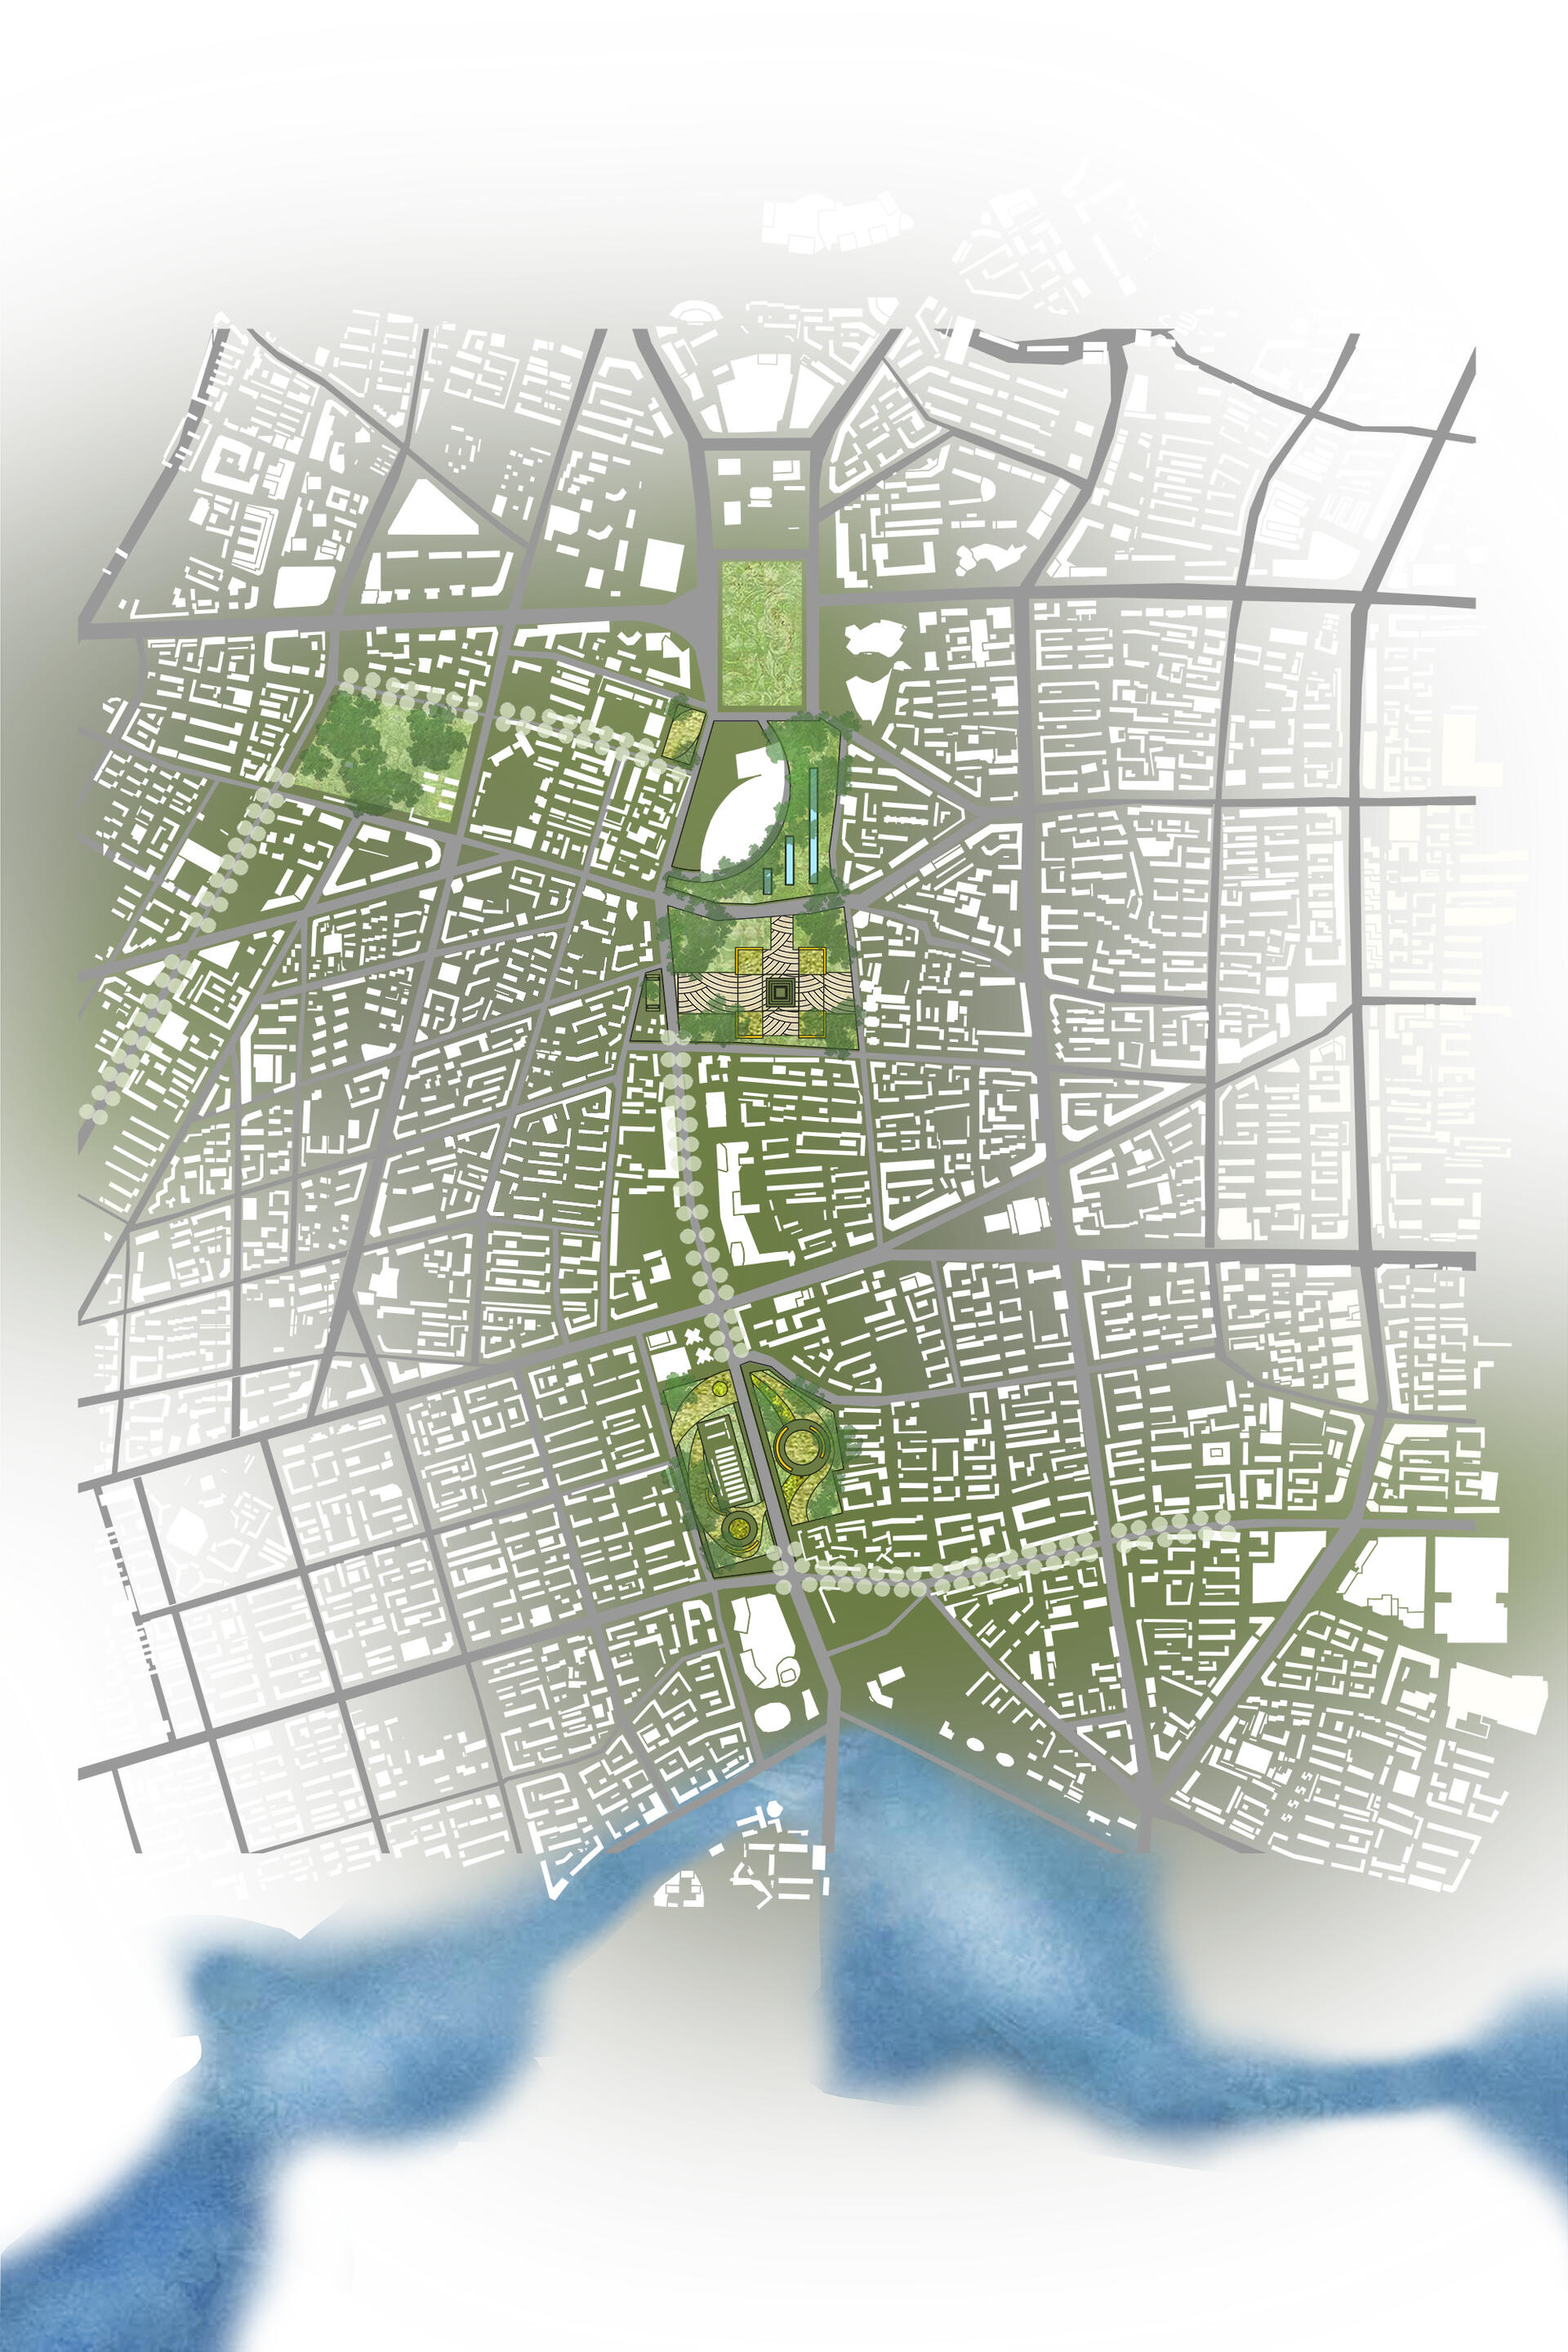 A general overview of the design, creating new networks and experiences in the city through greenway design